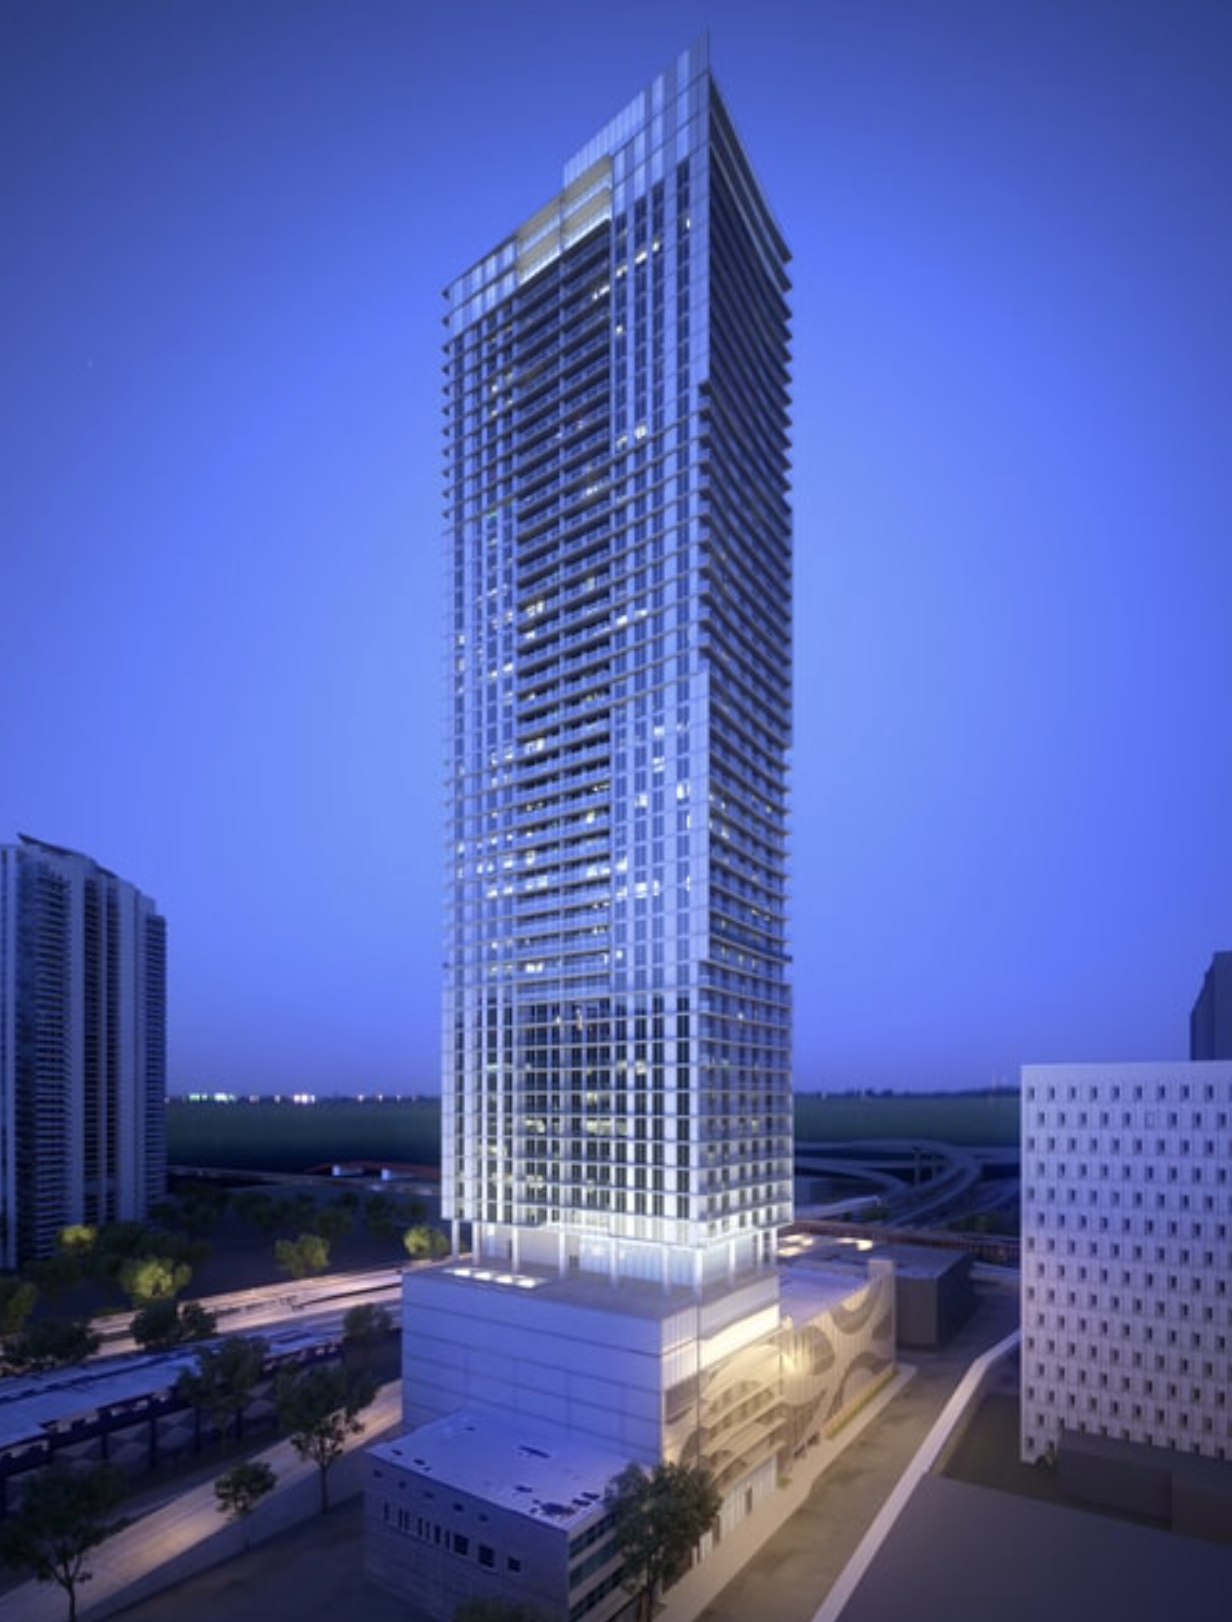 M Tower. Designed by Zyscovich Architects.